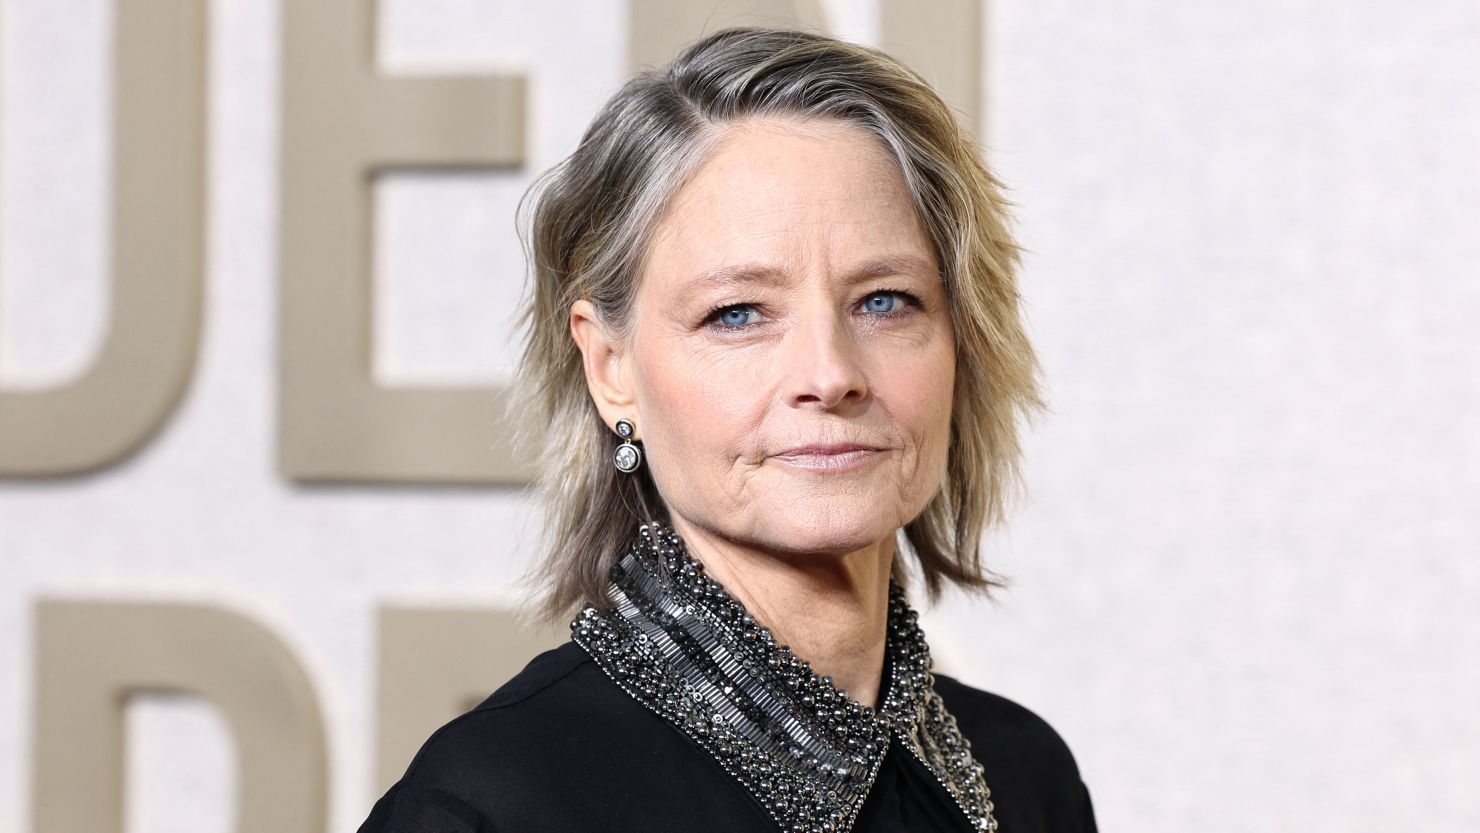 Jodie Foster Talks Mentoring and What's 'Annoying' About Gen Z